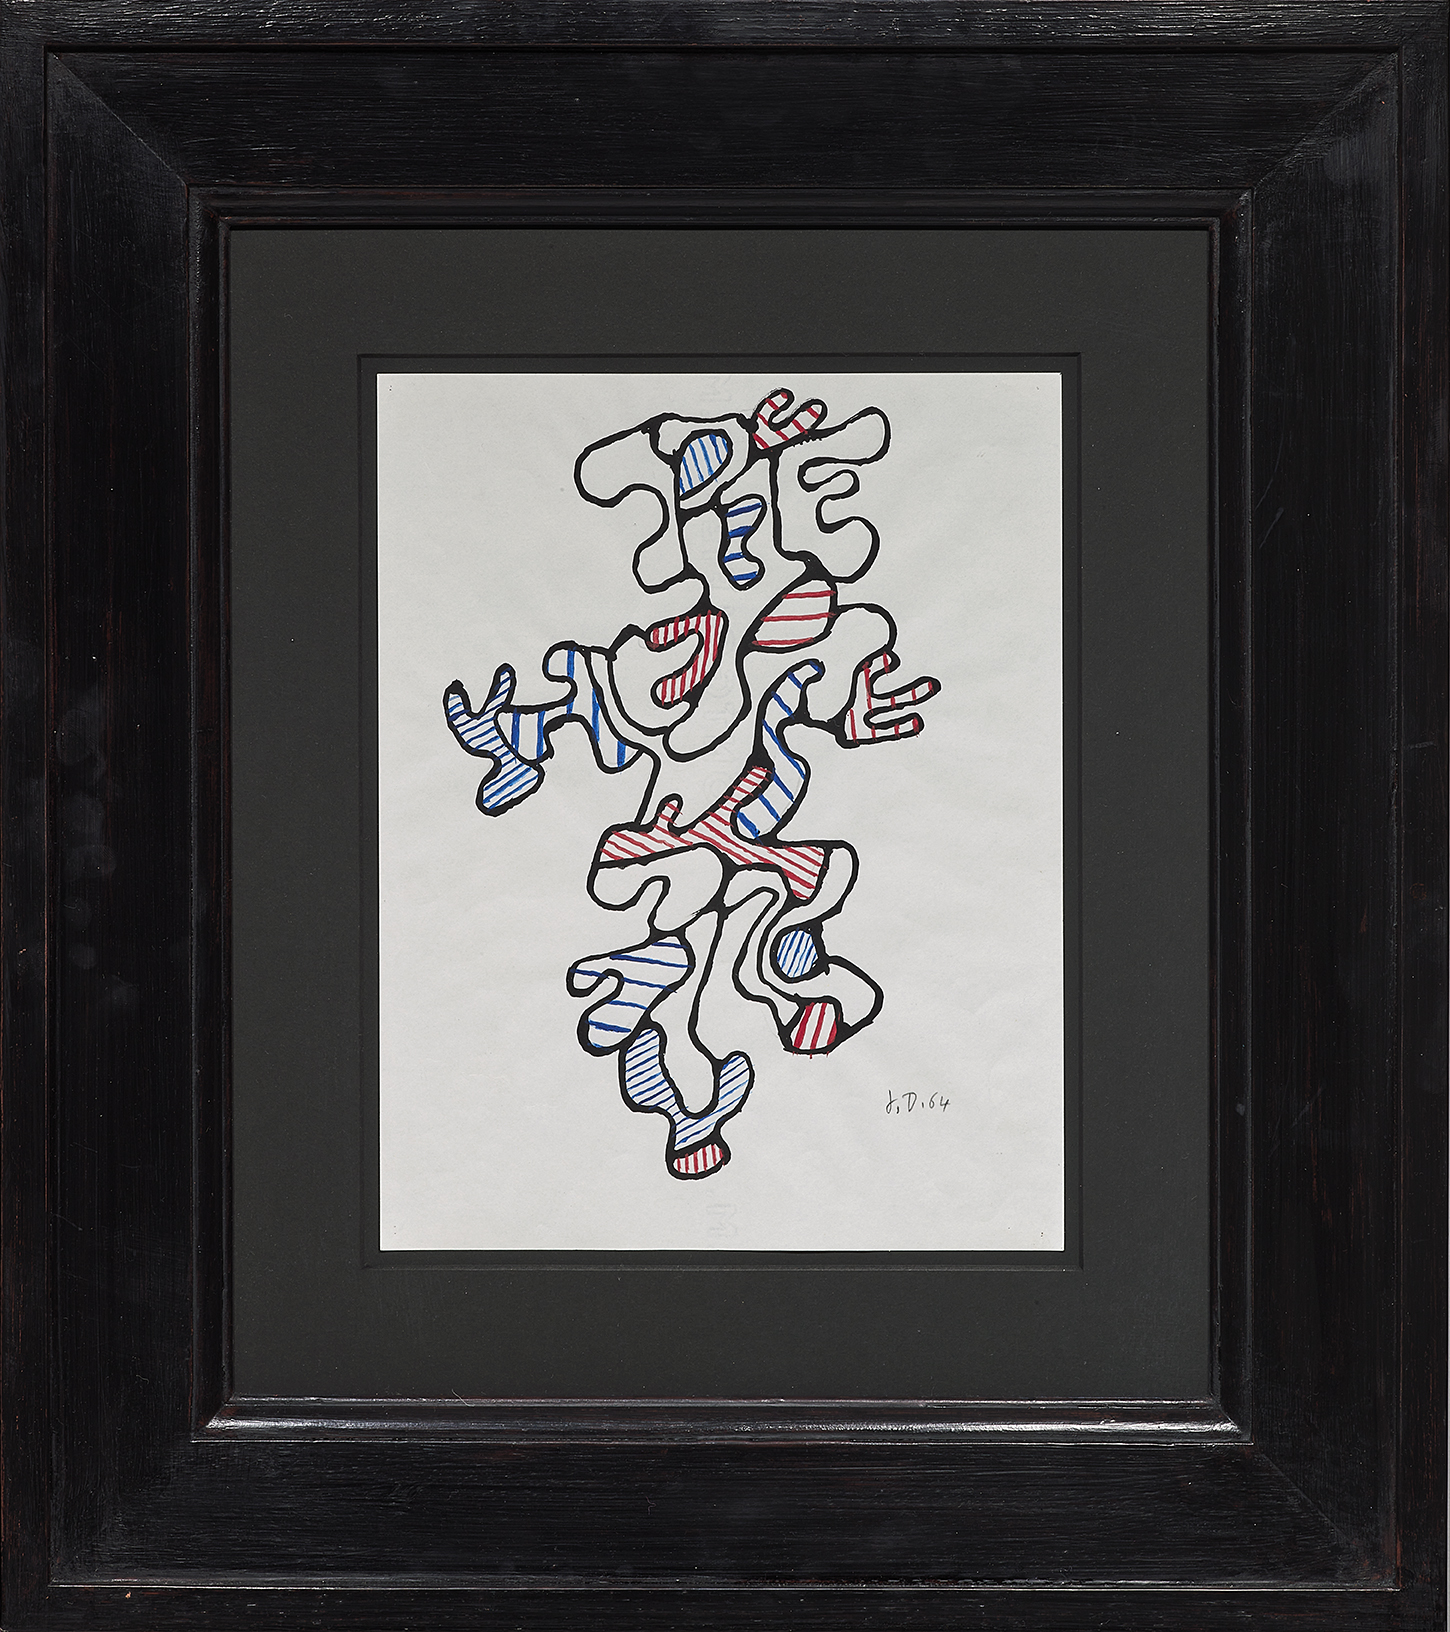 Jean  Dubuffet - Personnage I, 1964